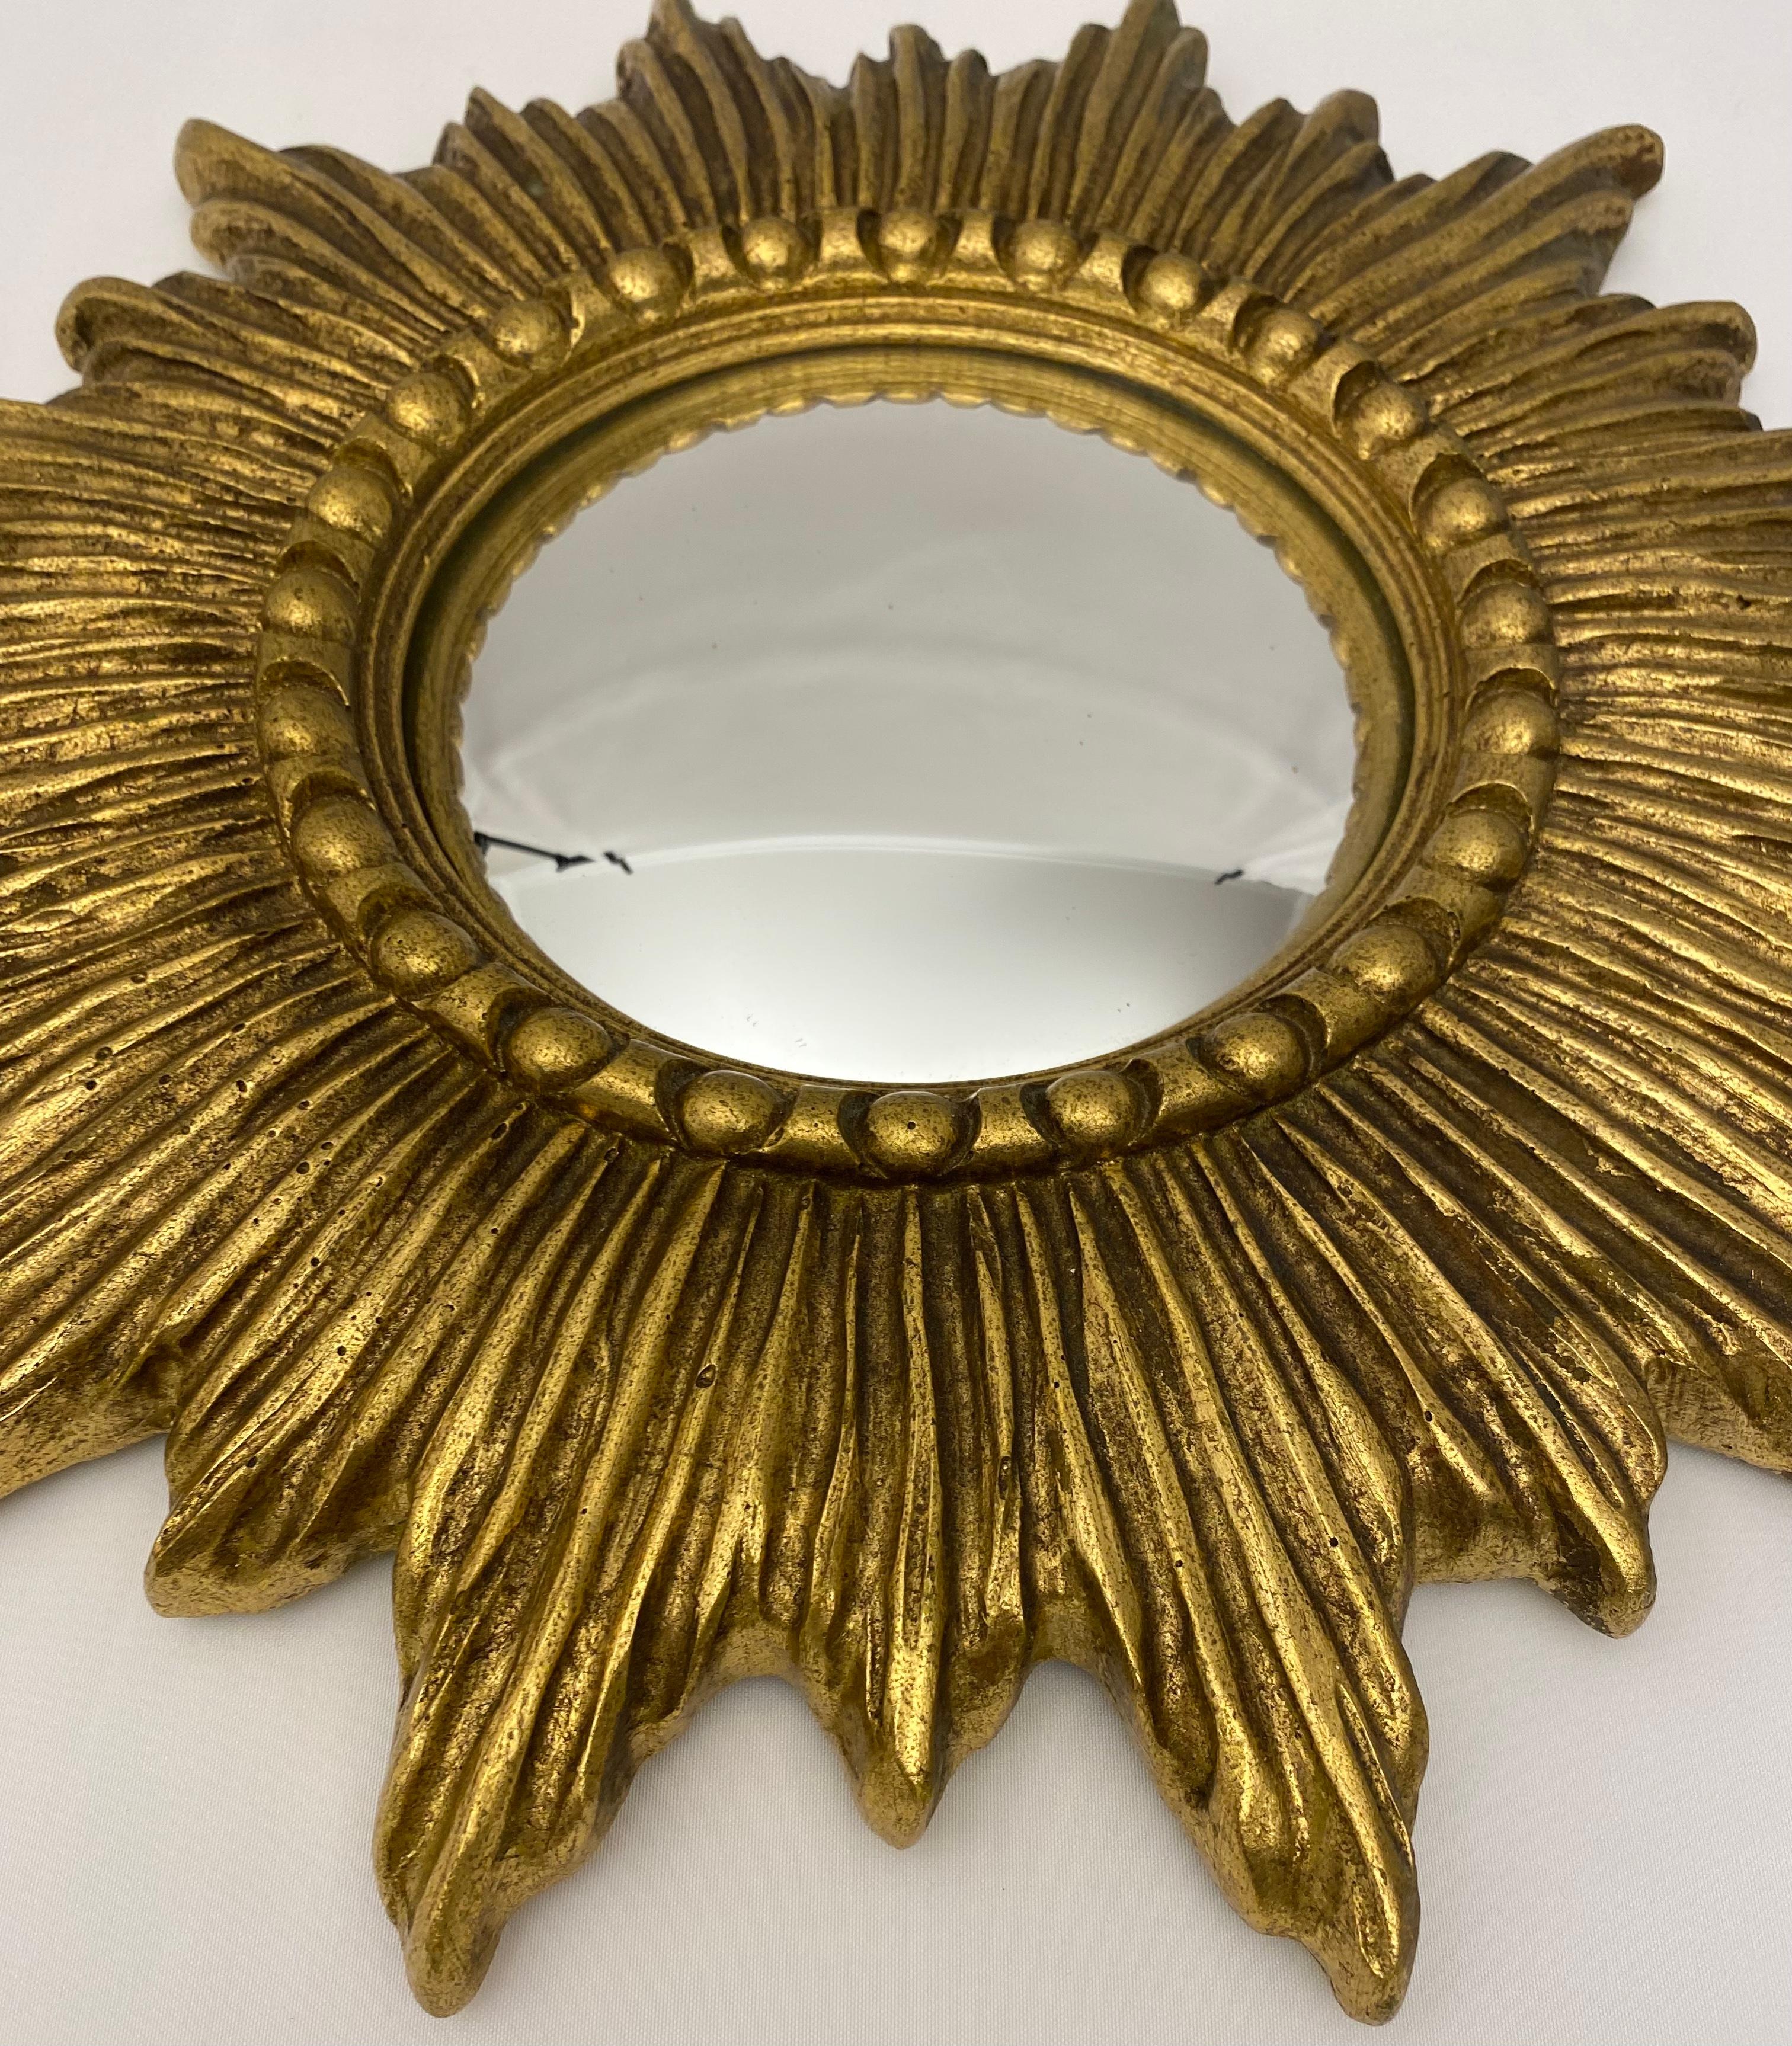 A lovely French gilt sunburst or starburst mirror with round convex mirrored glass center in moulded wood frame.

Measures: Diameter 14 inches x 1 1/8